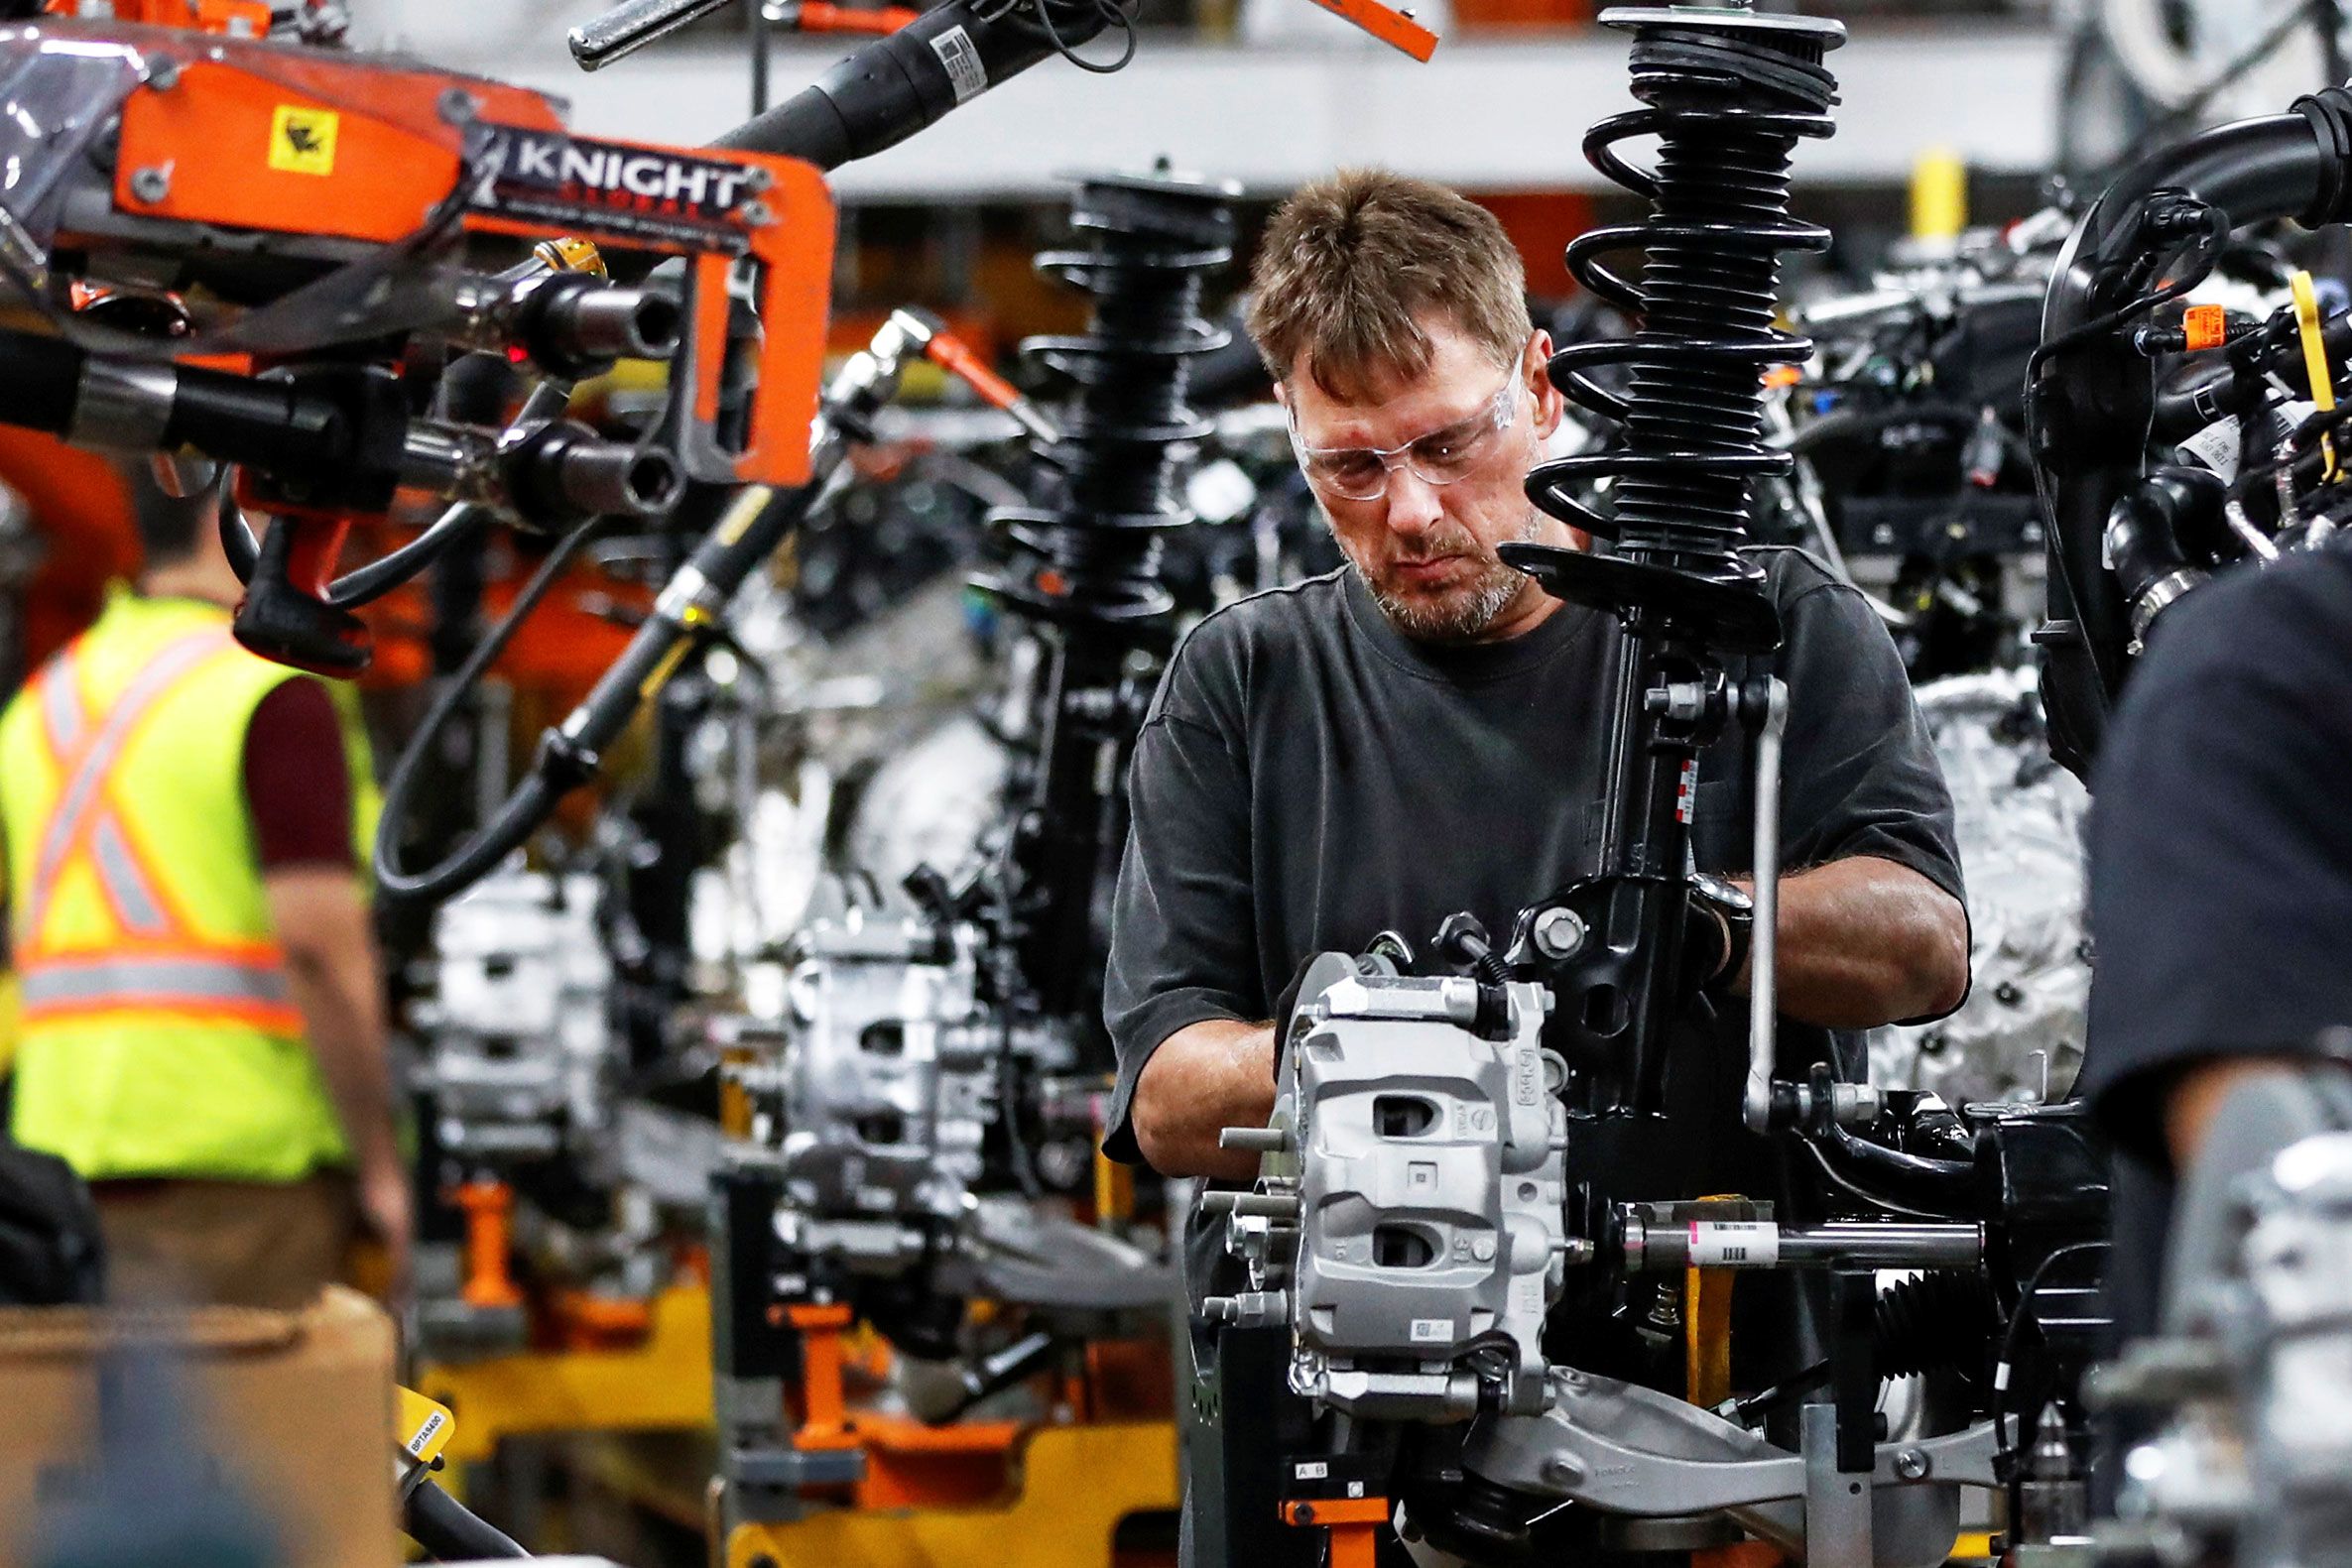 Weakness in US industrial economy could push Fed to cut rates